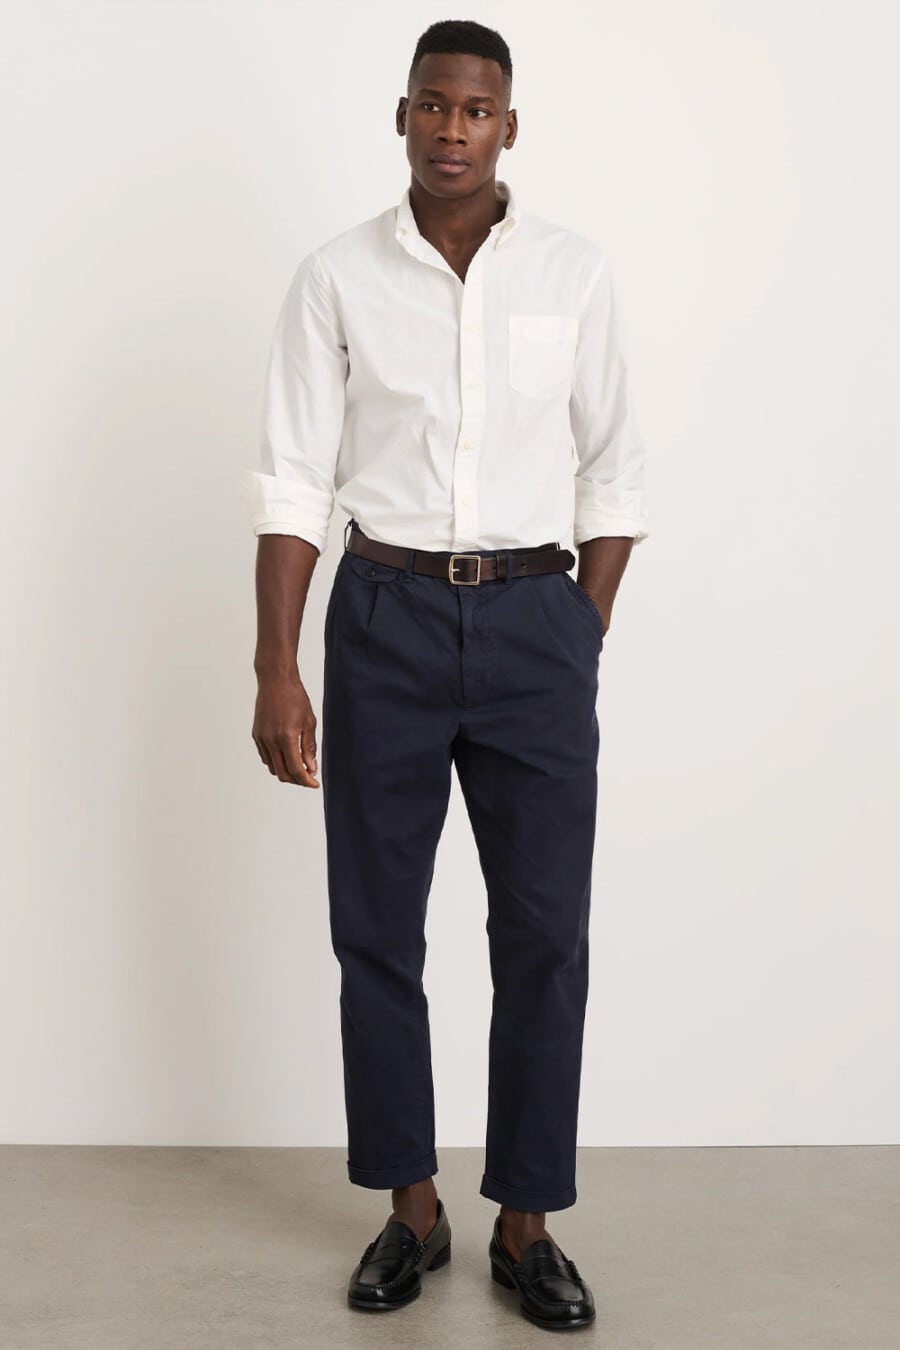 Men's cropped navy chinos, tucked in white shirt, brown leather belt and black leather penny loafers outfit